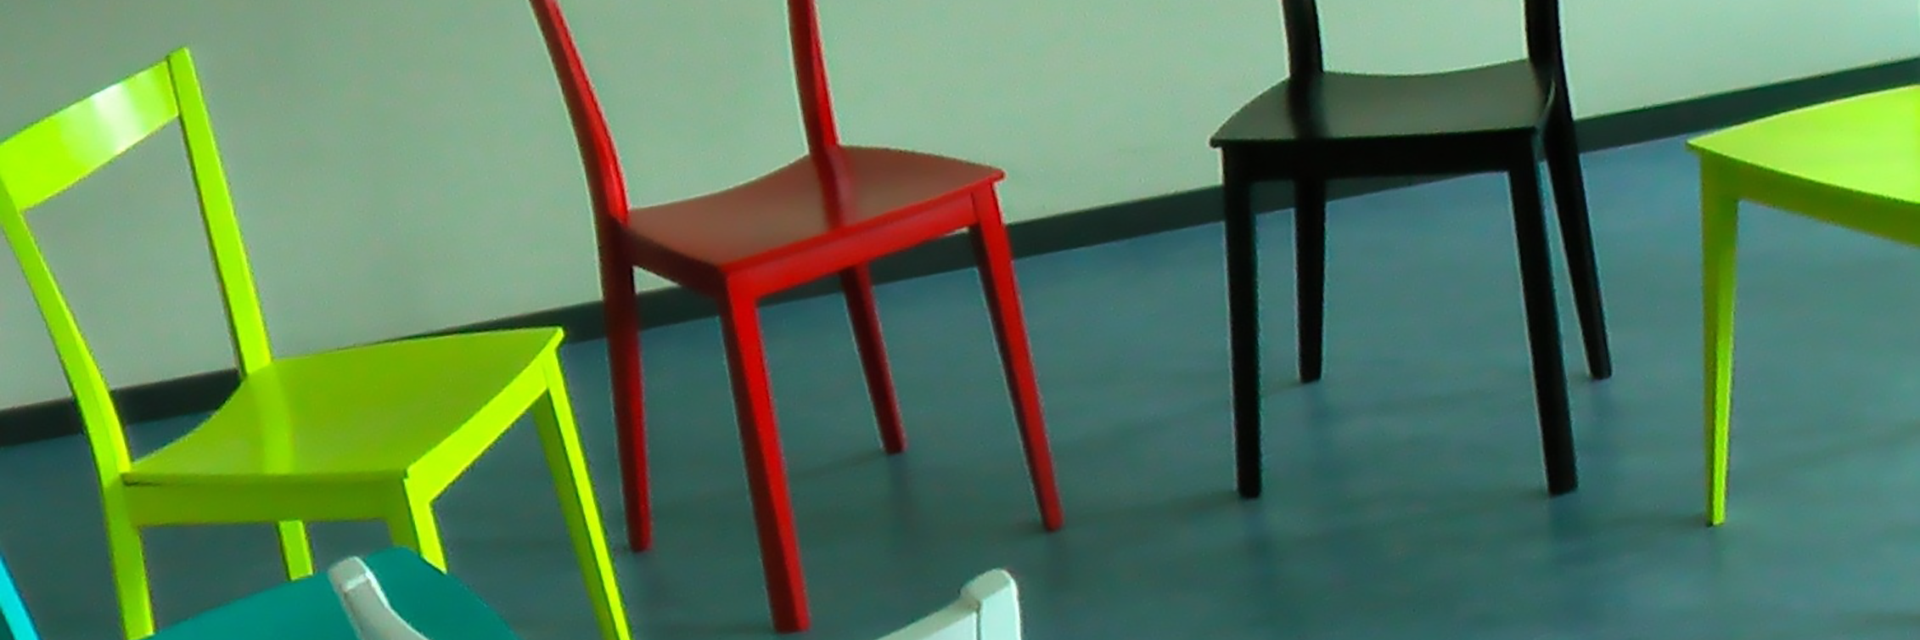 group-chairs